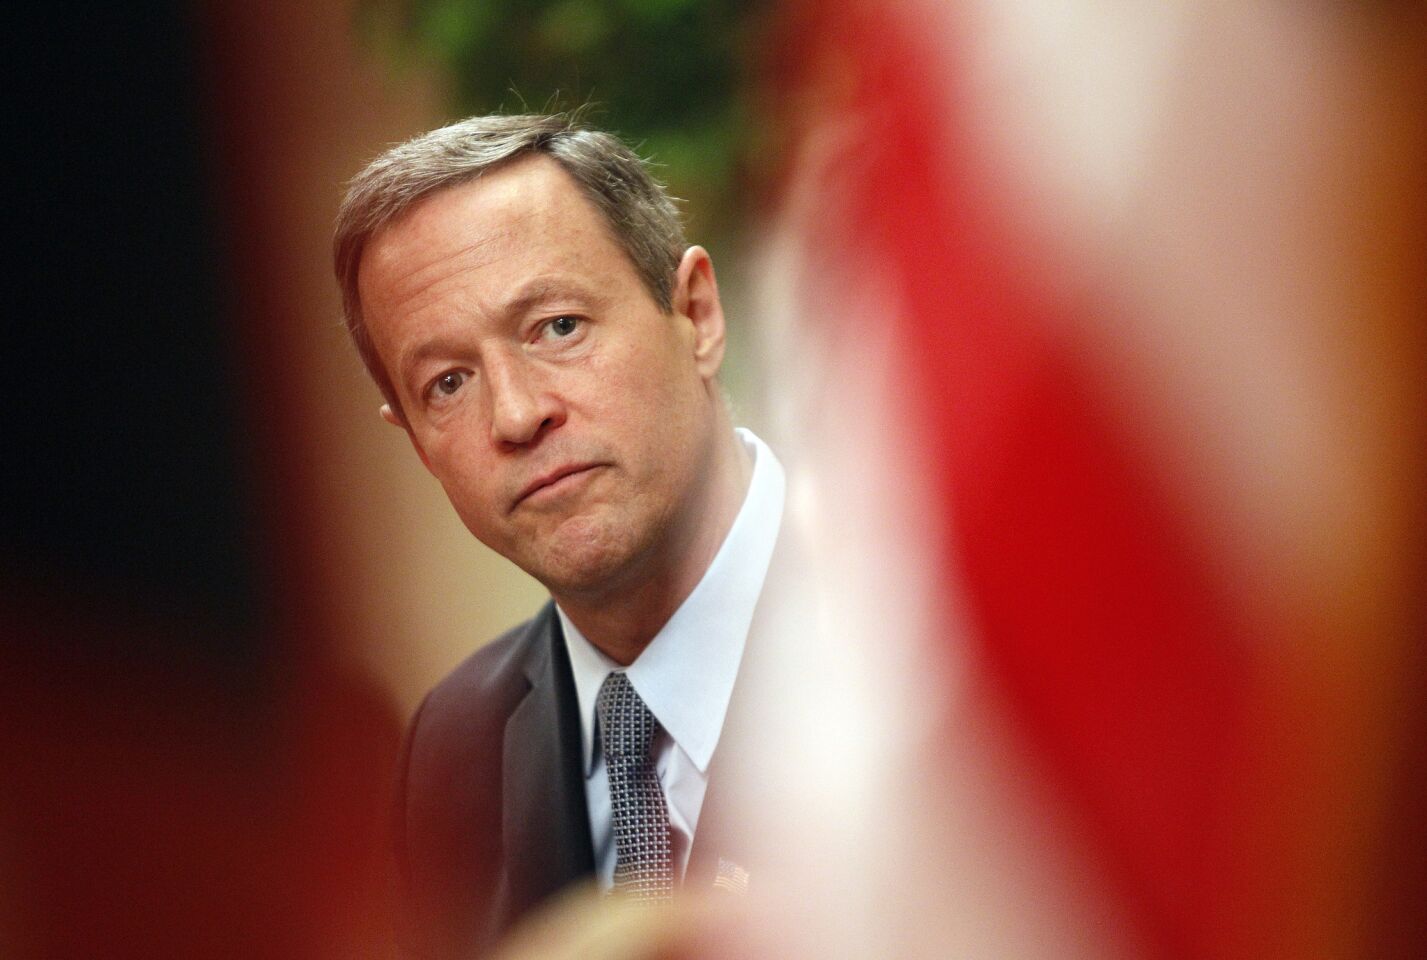 One of the more liberal members of the Democratic crop, Gov. Martin O'Malley (Md.) has been at the forefront of his state's fight over gay marriage and signed a bill decriminalizing marijuana. Plus, O'Malley has passed the Iowa litmus test, headlining a steak fry event in 2012.